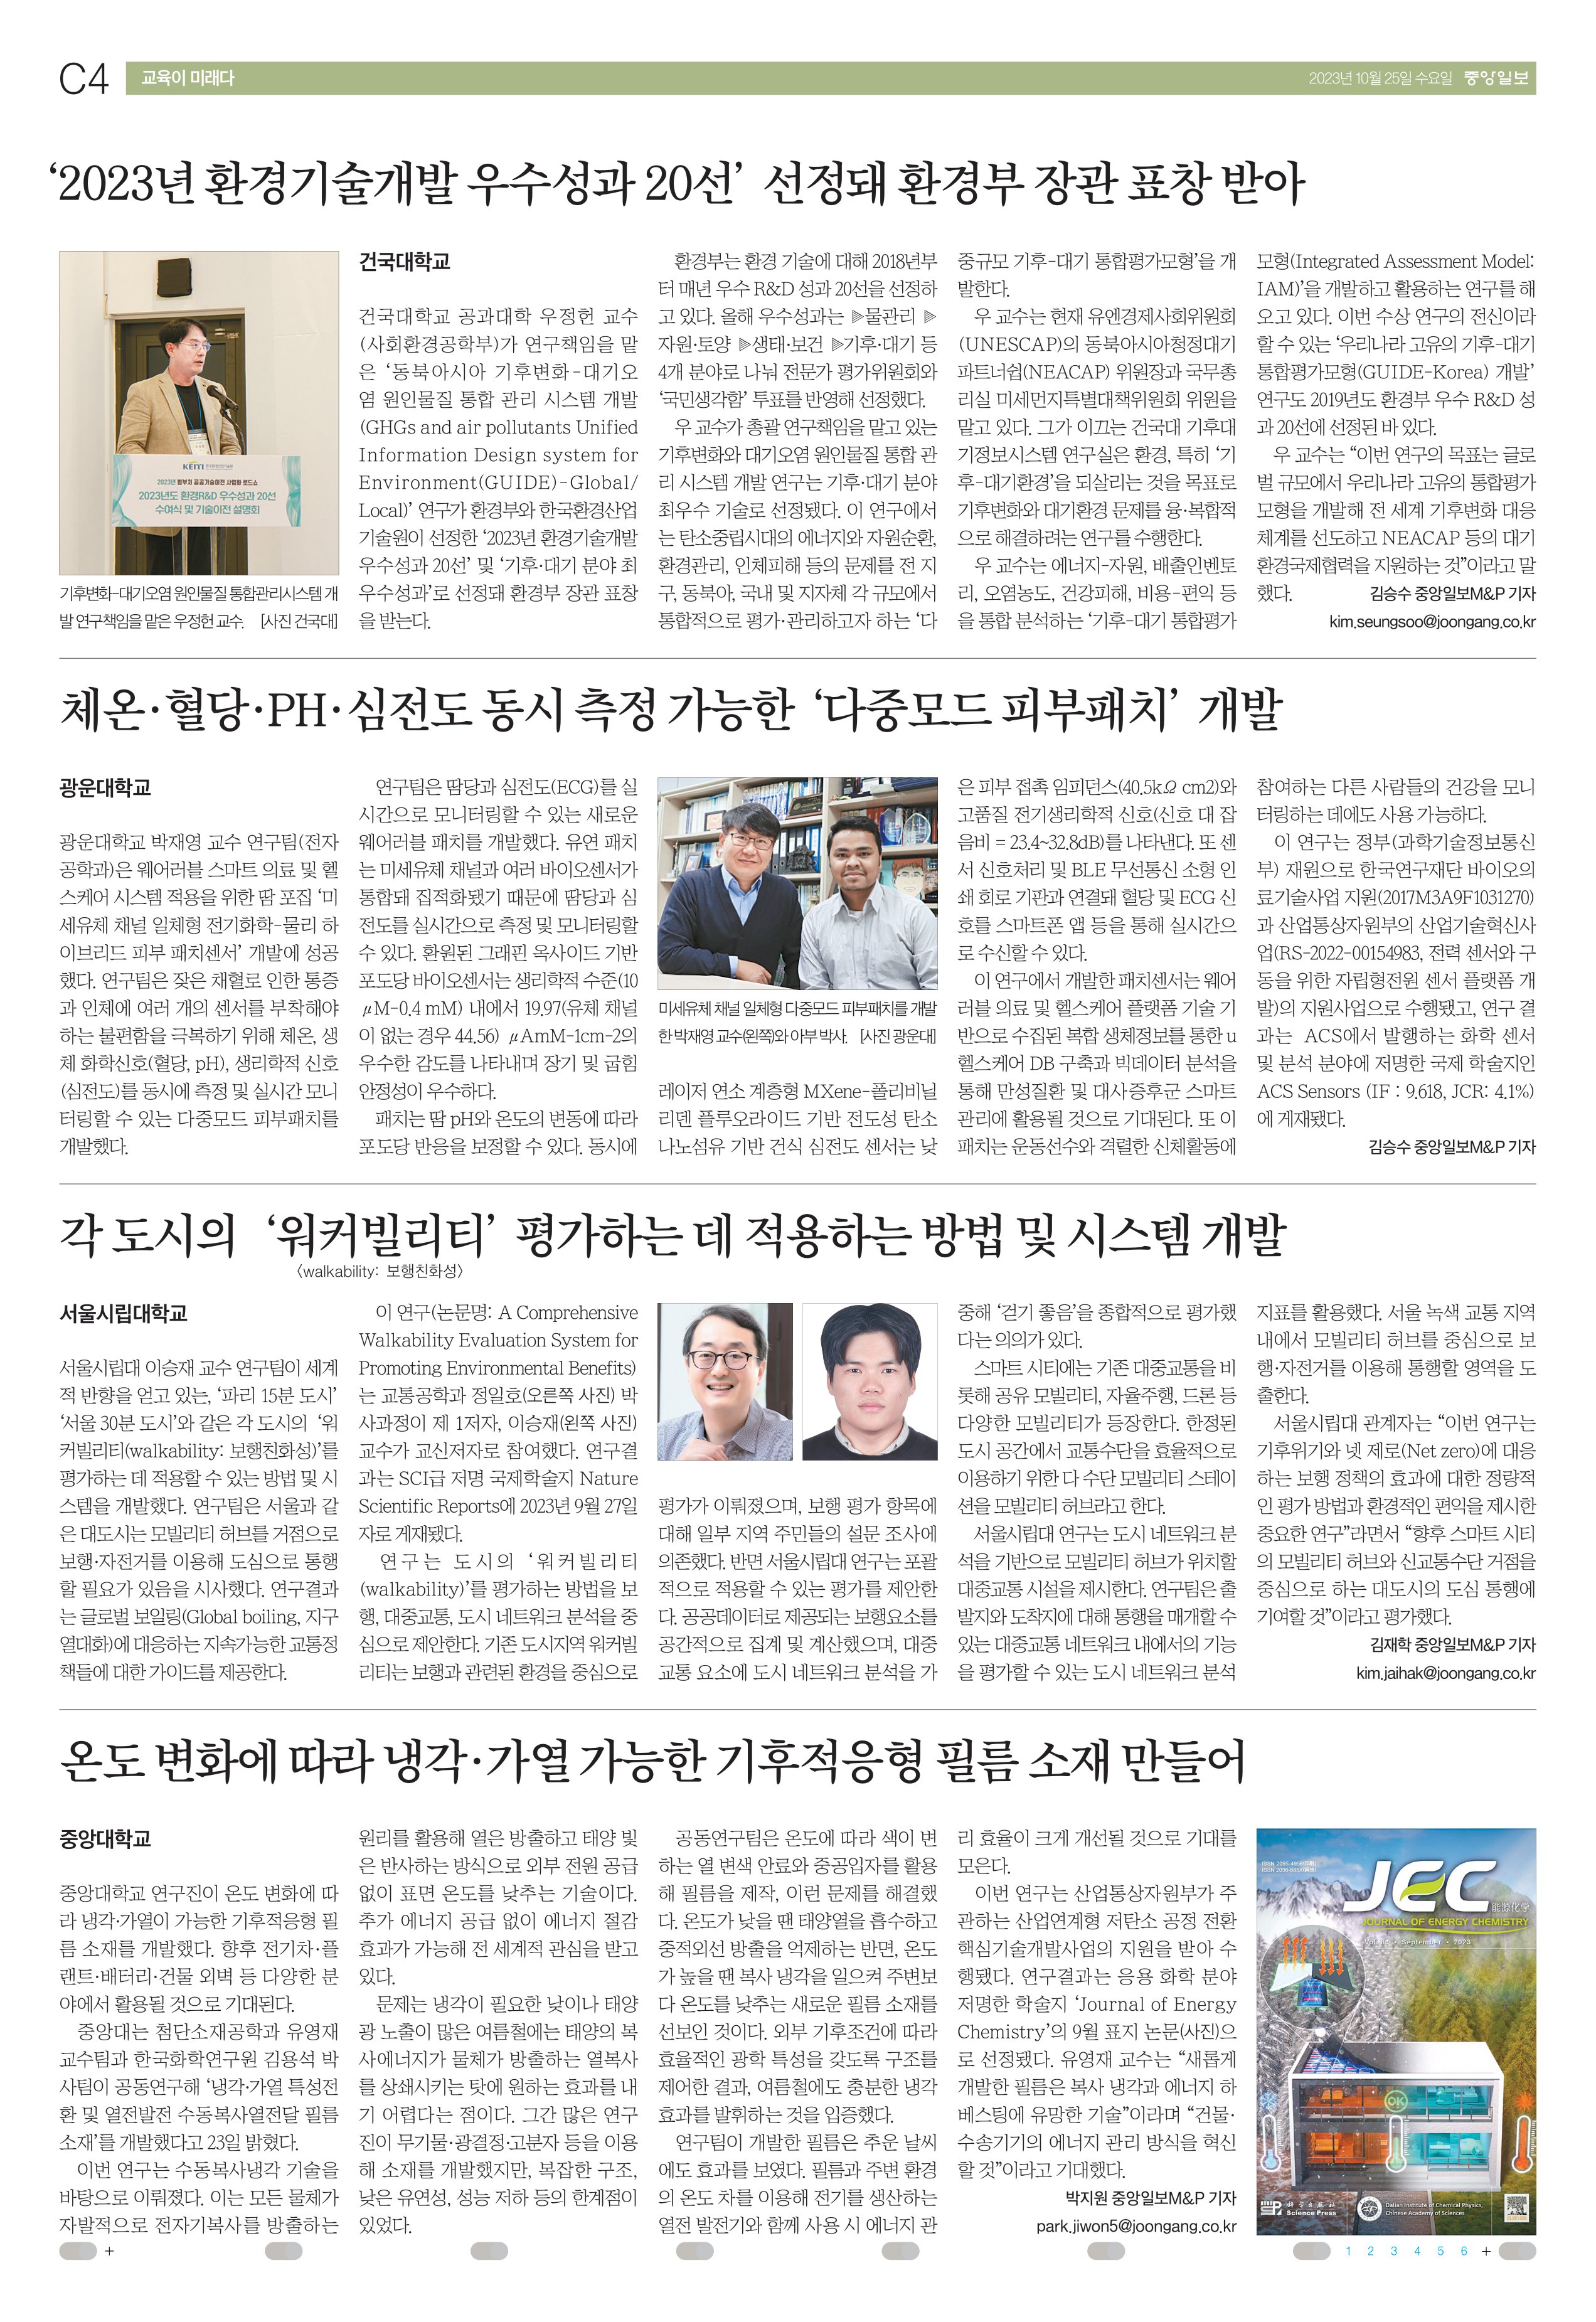 Our Lab is Focused on as a Special Research Issue in Joongang Ilbo News Paper